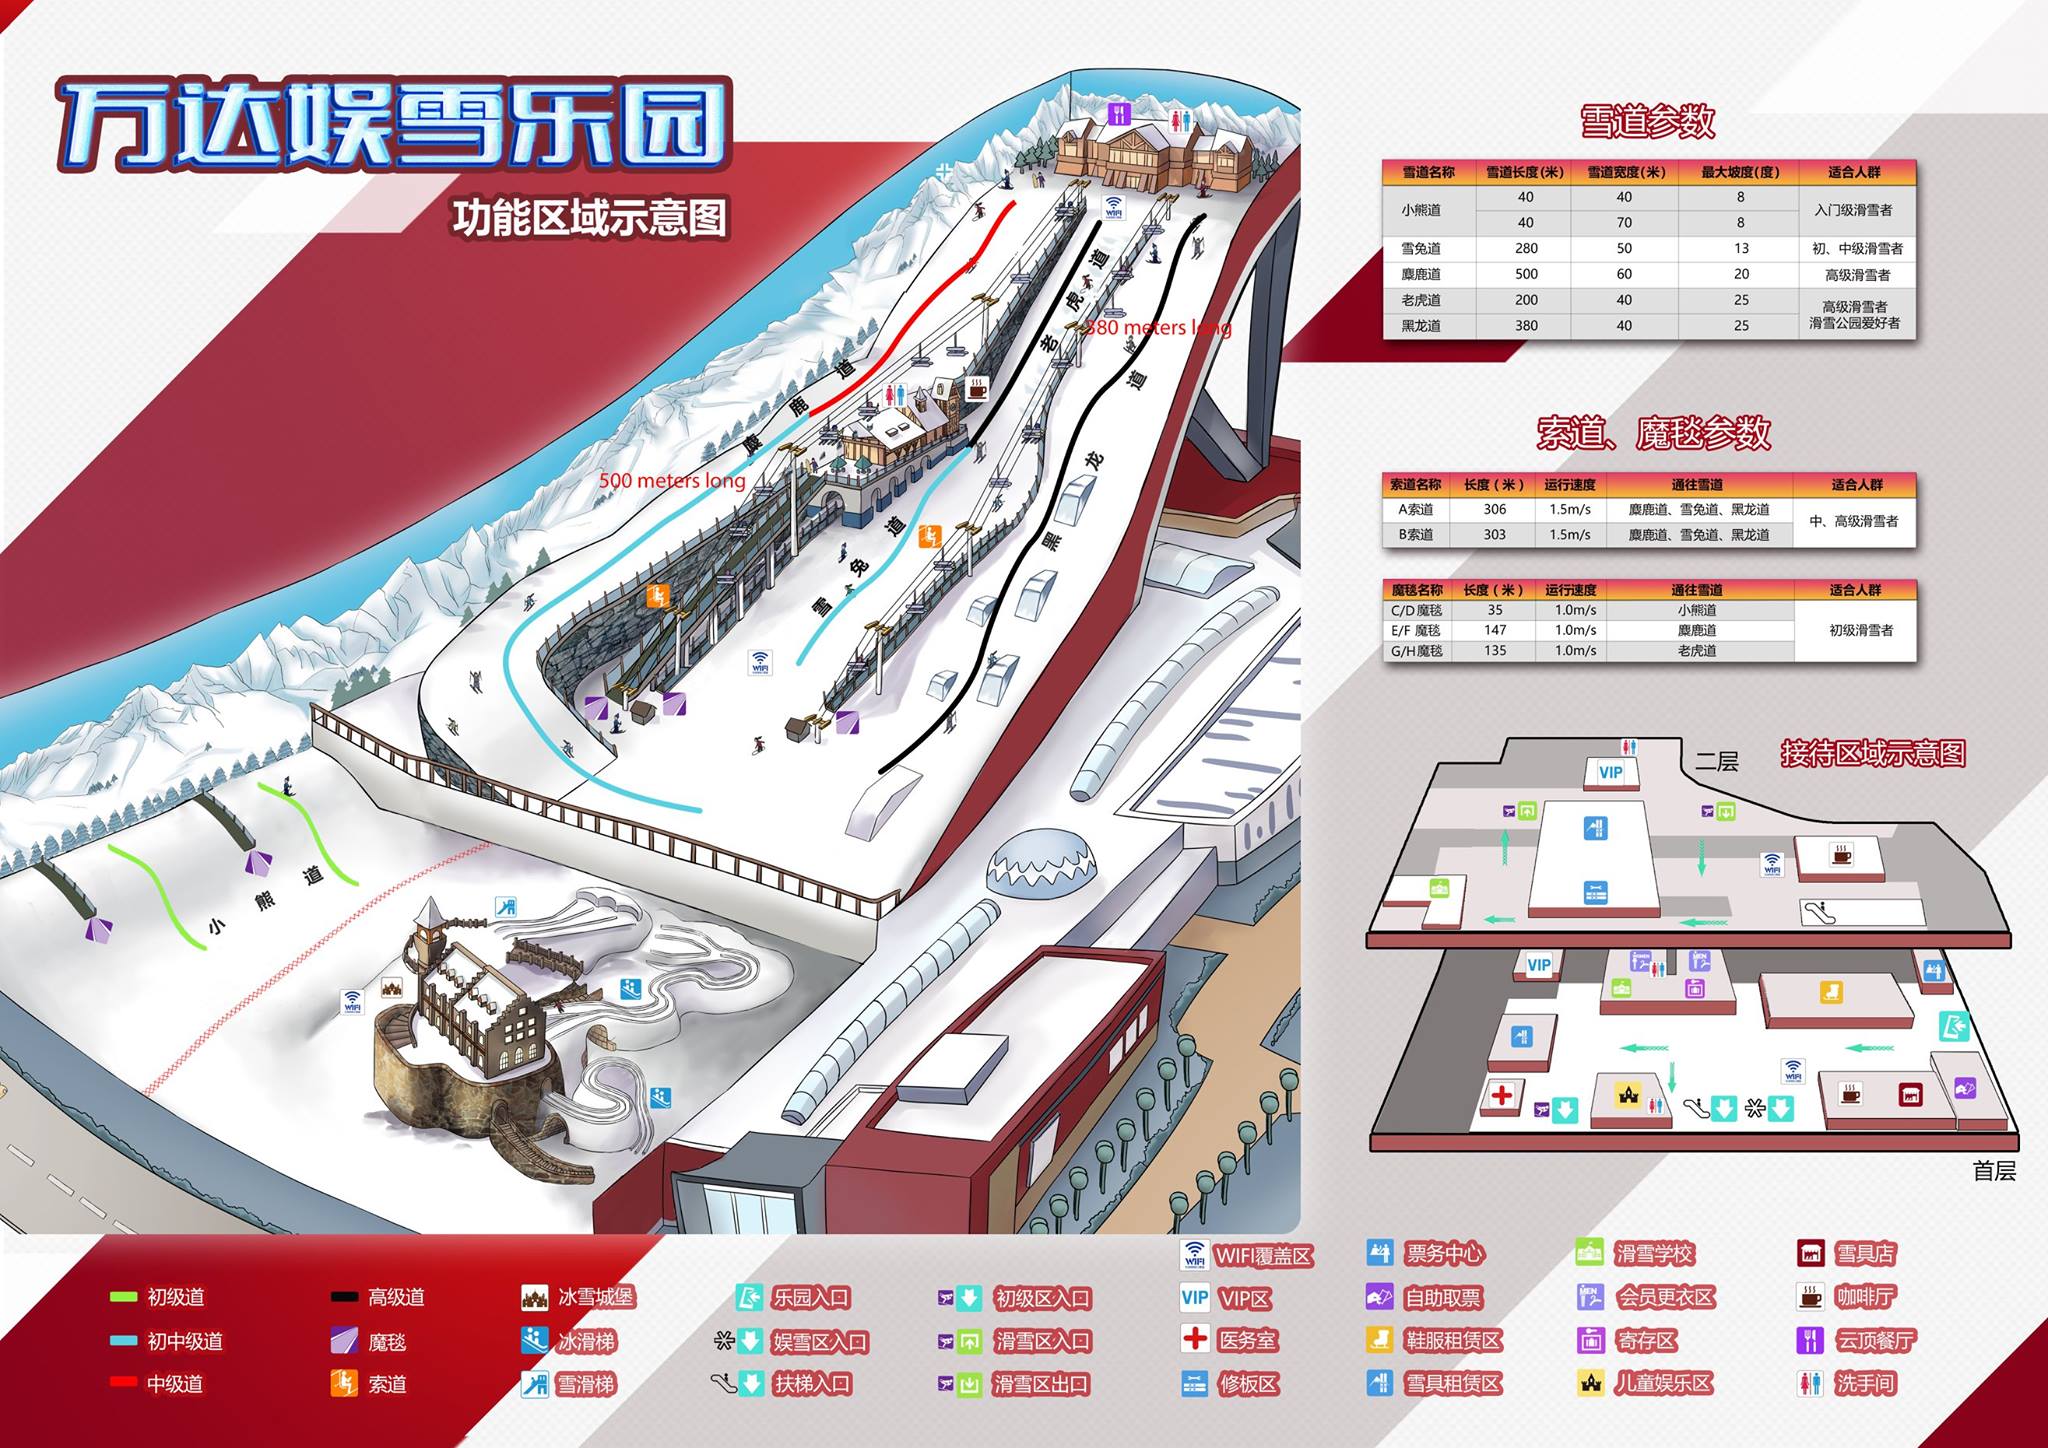 Piste Map Published For World’s New Biggest Indoor Snow Centre